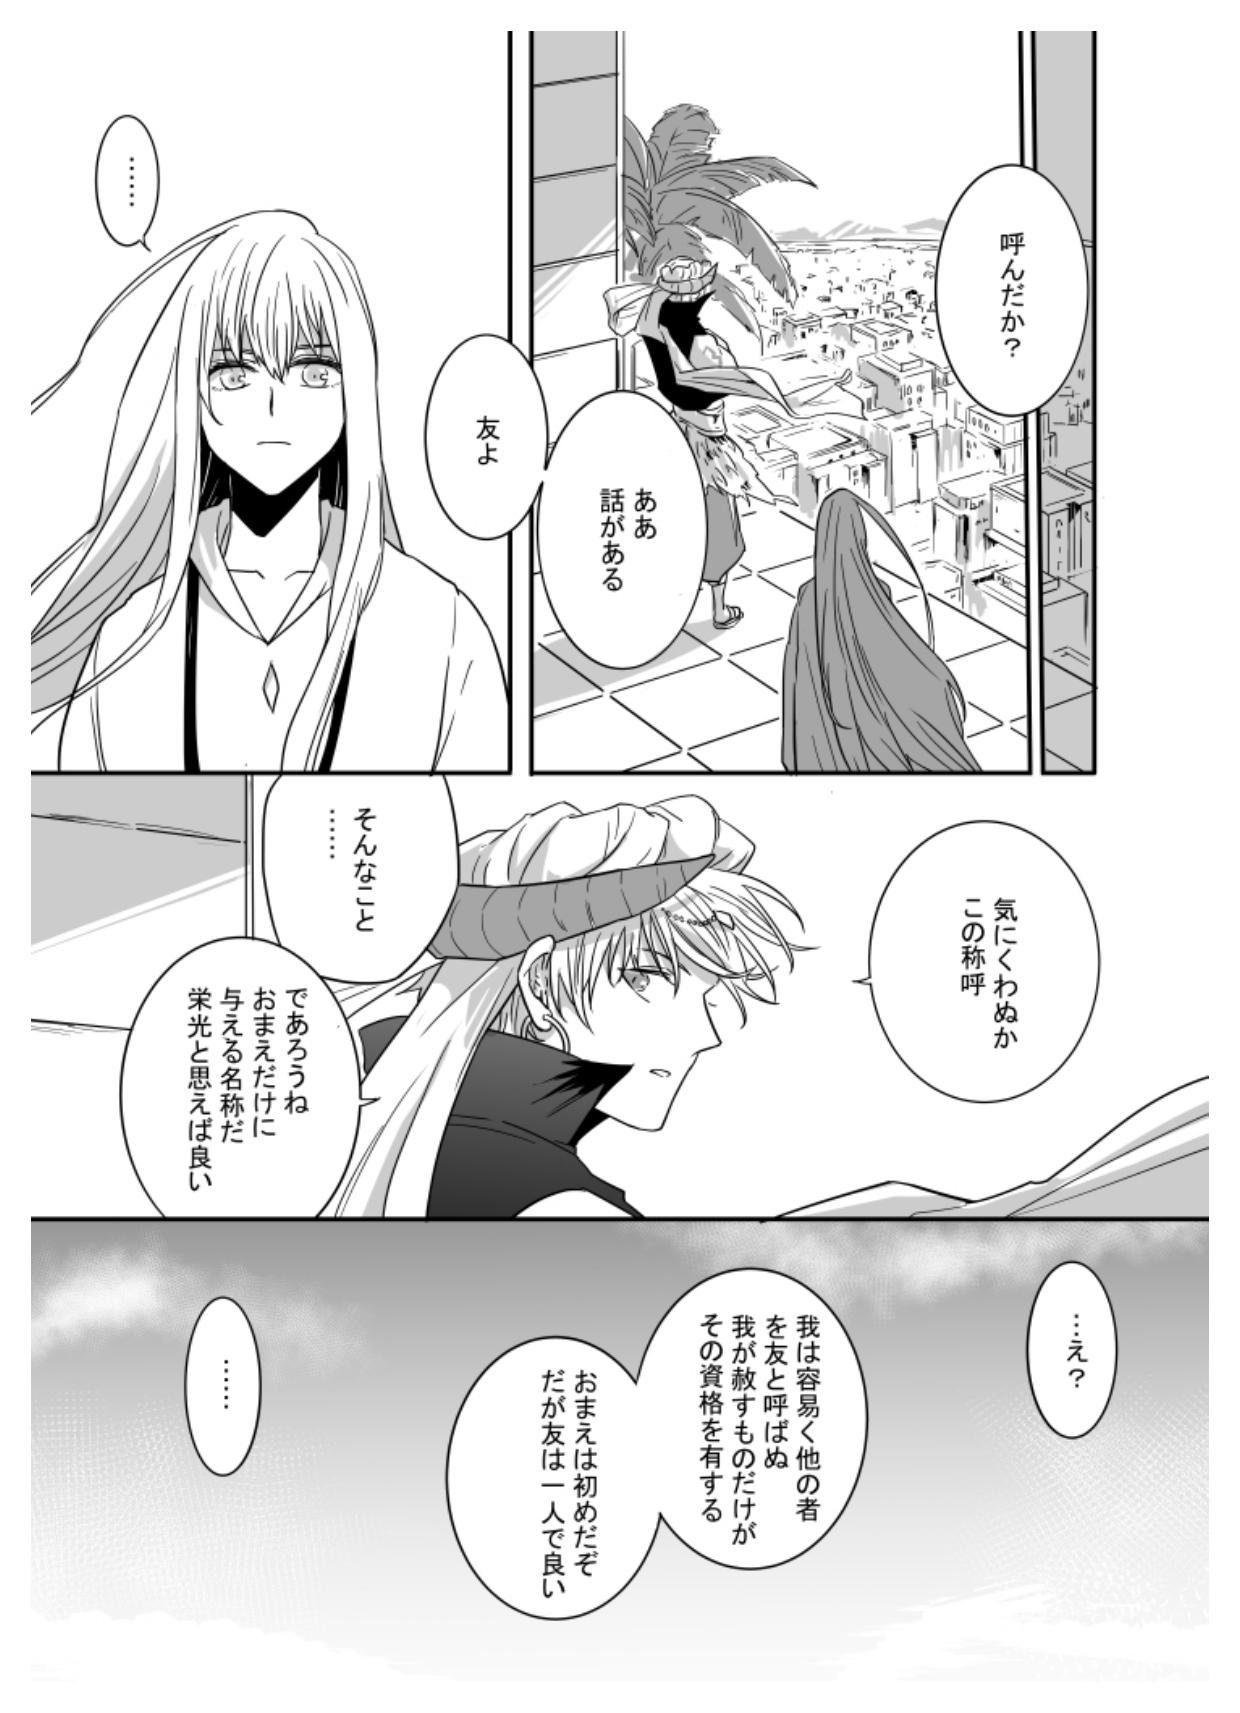 Fingers If I have soul - Fate grand order Girlsfucking - Page 11